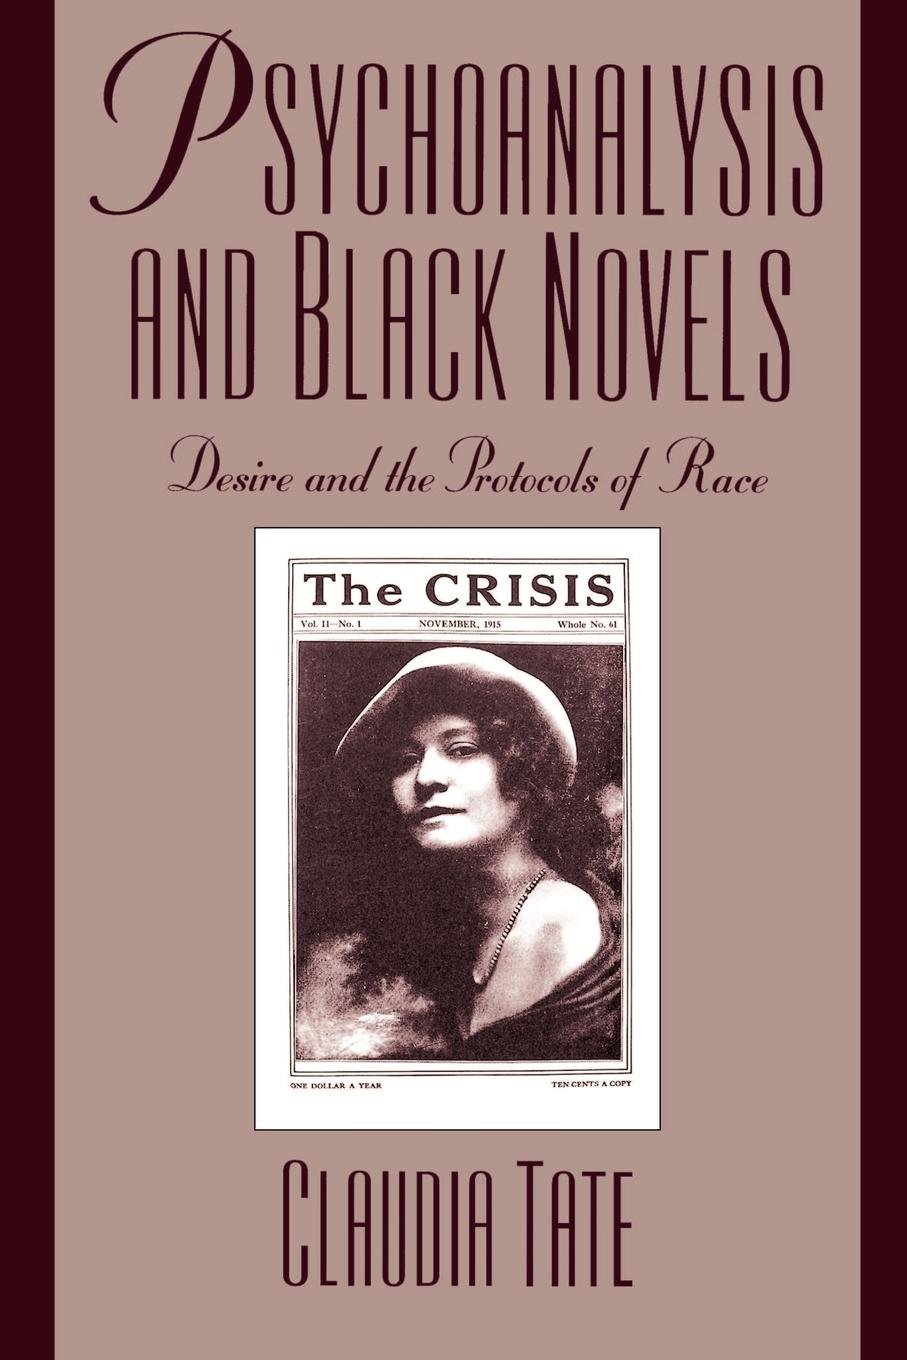 Psychoanalysis and Black Novels: Desire and the Protocols of Race